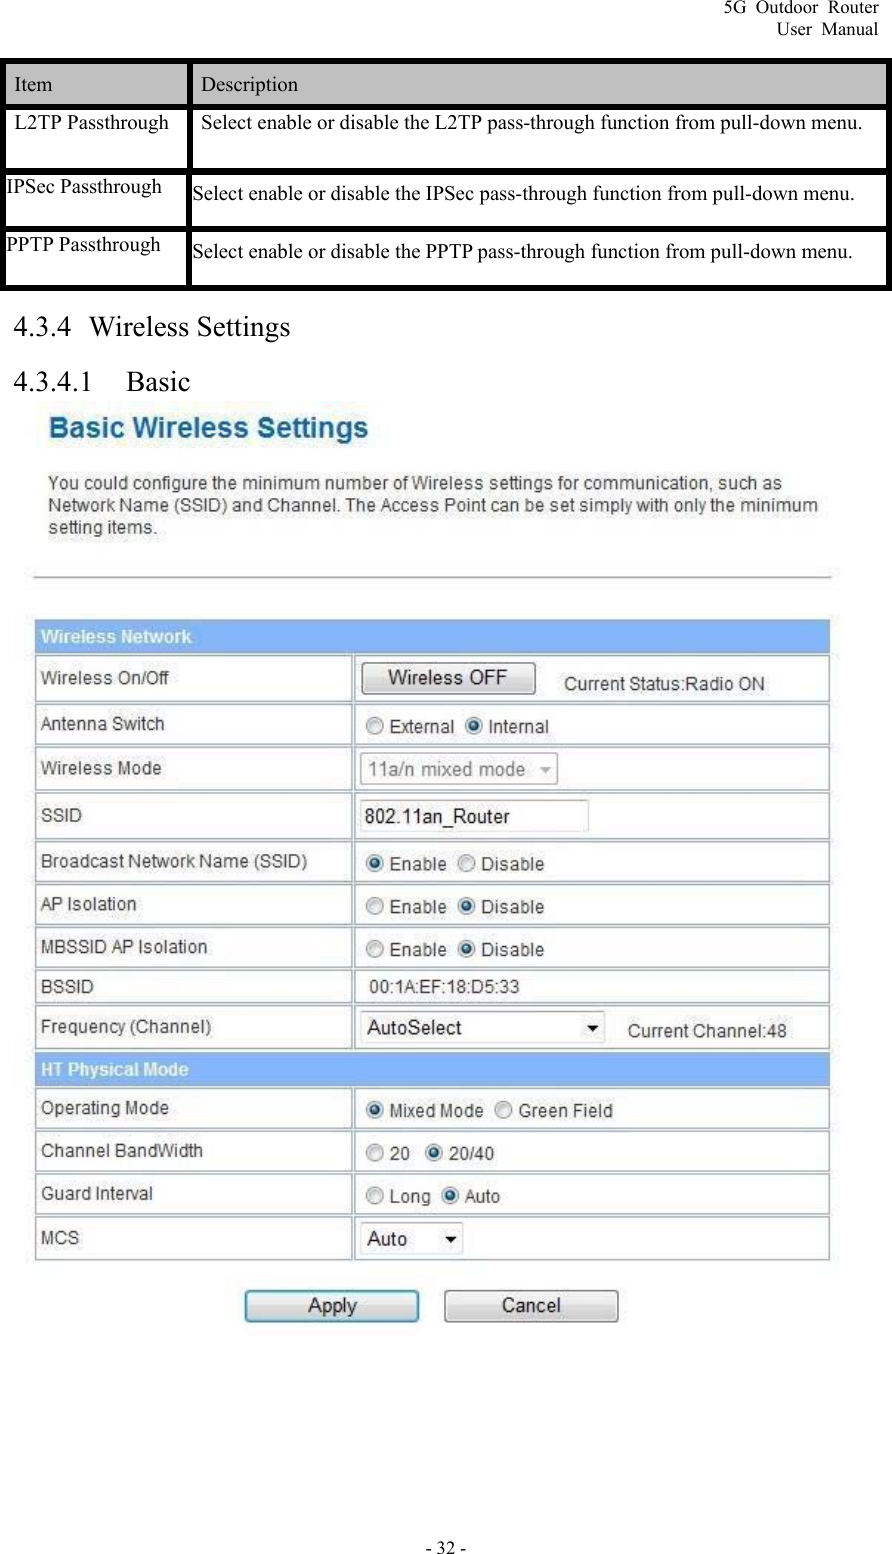 5G Outdoor Router User Manual - 32 - Item   Description  L2TP Passthrough  Select enable or disable the L2TP pass-through function from pull-down menu. IPSec Passthrough  Select enable or disable the IPSec pass-through function from pull-down menu. PPTP Passthrough  Select enable or disable the PPTP pass-through function from pull-down menu. 4.3.4 Wireless Settings 4.3.4.1 Basic      